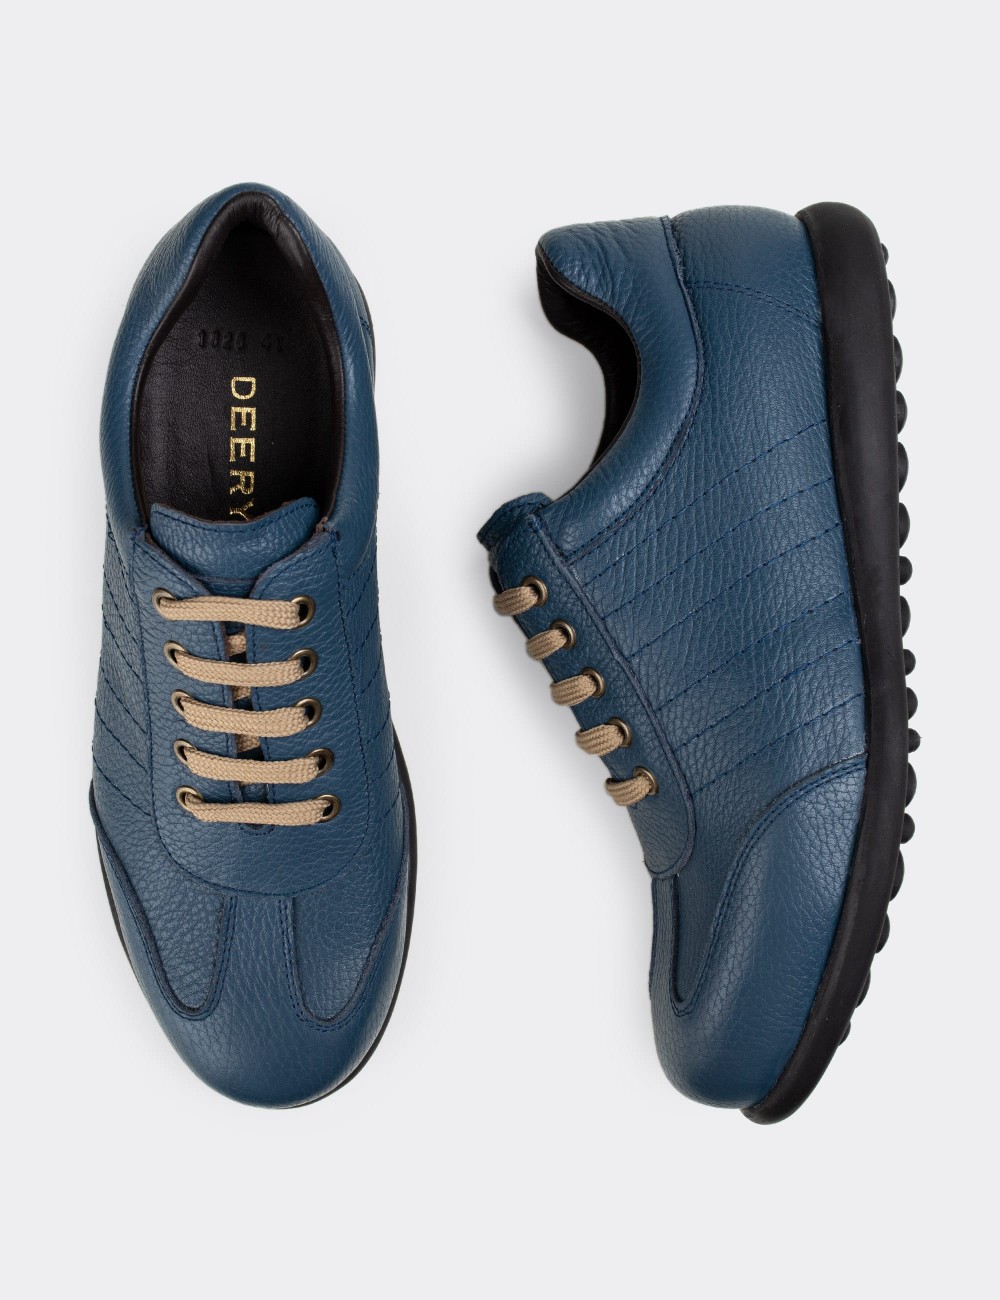 Blue  Leather Lace-up Shoes - 01826MMVIC09